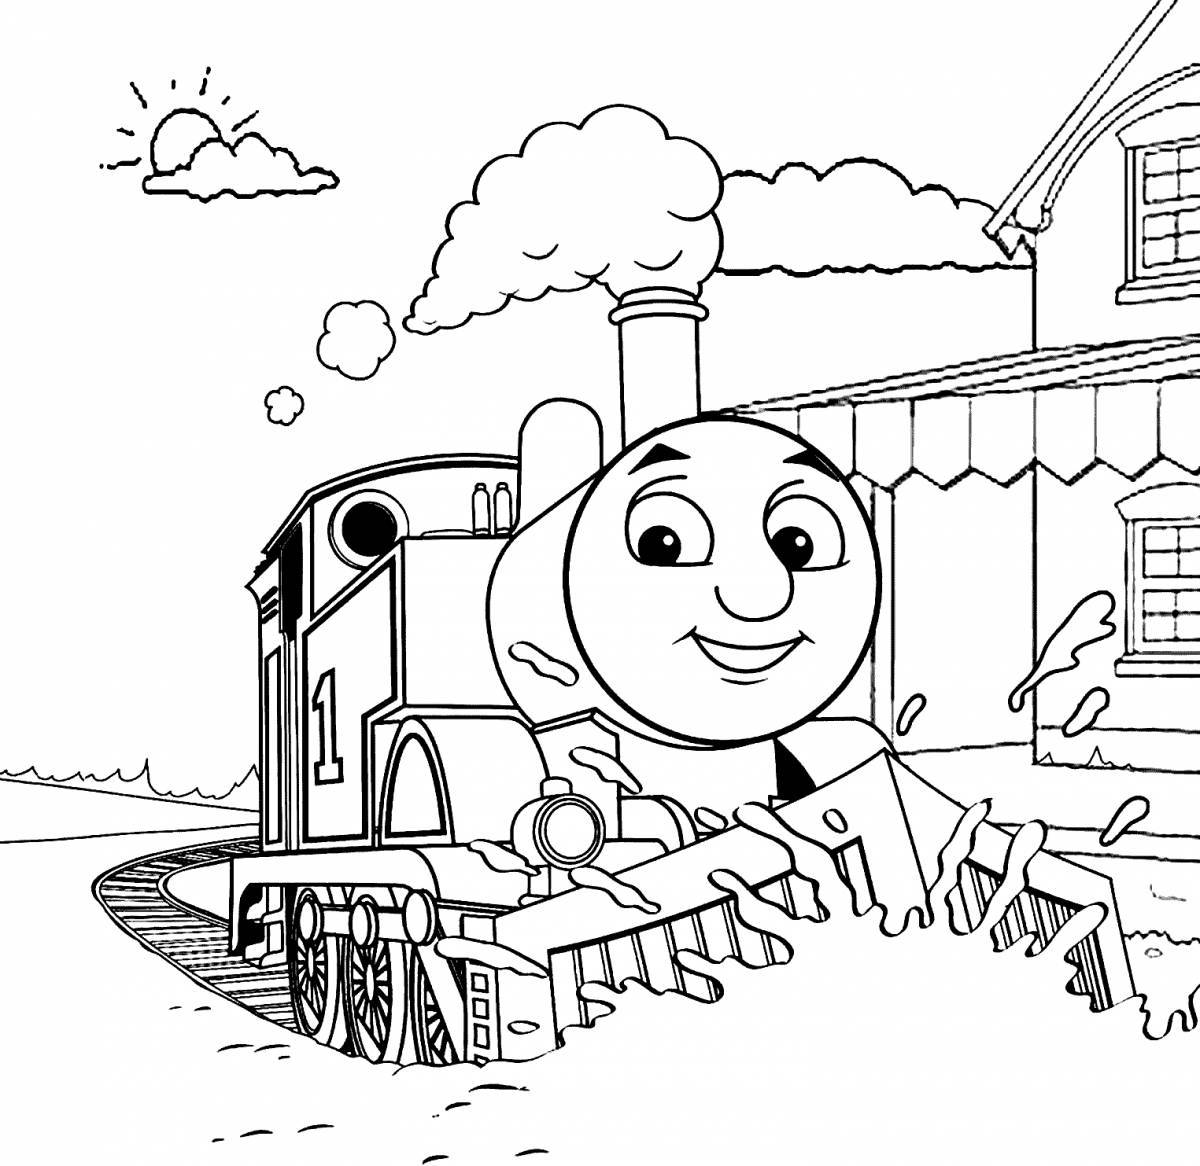 Coloring book glowing thomas the tank engine